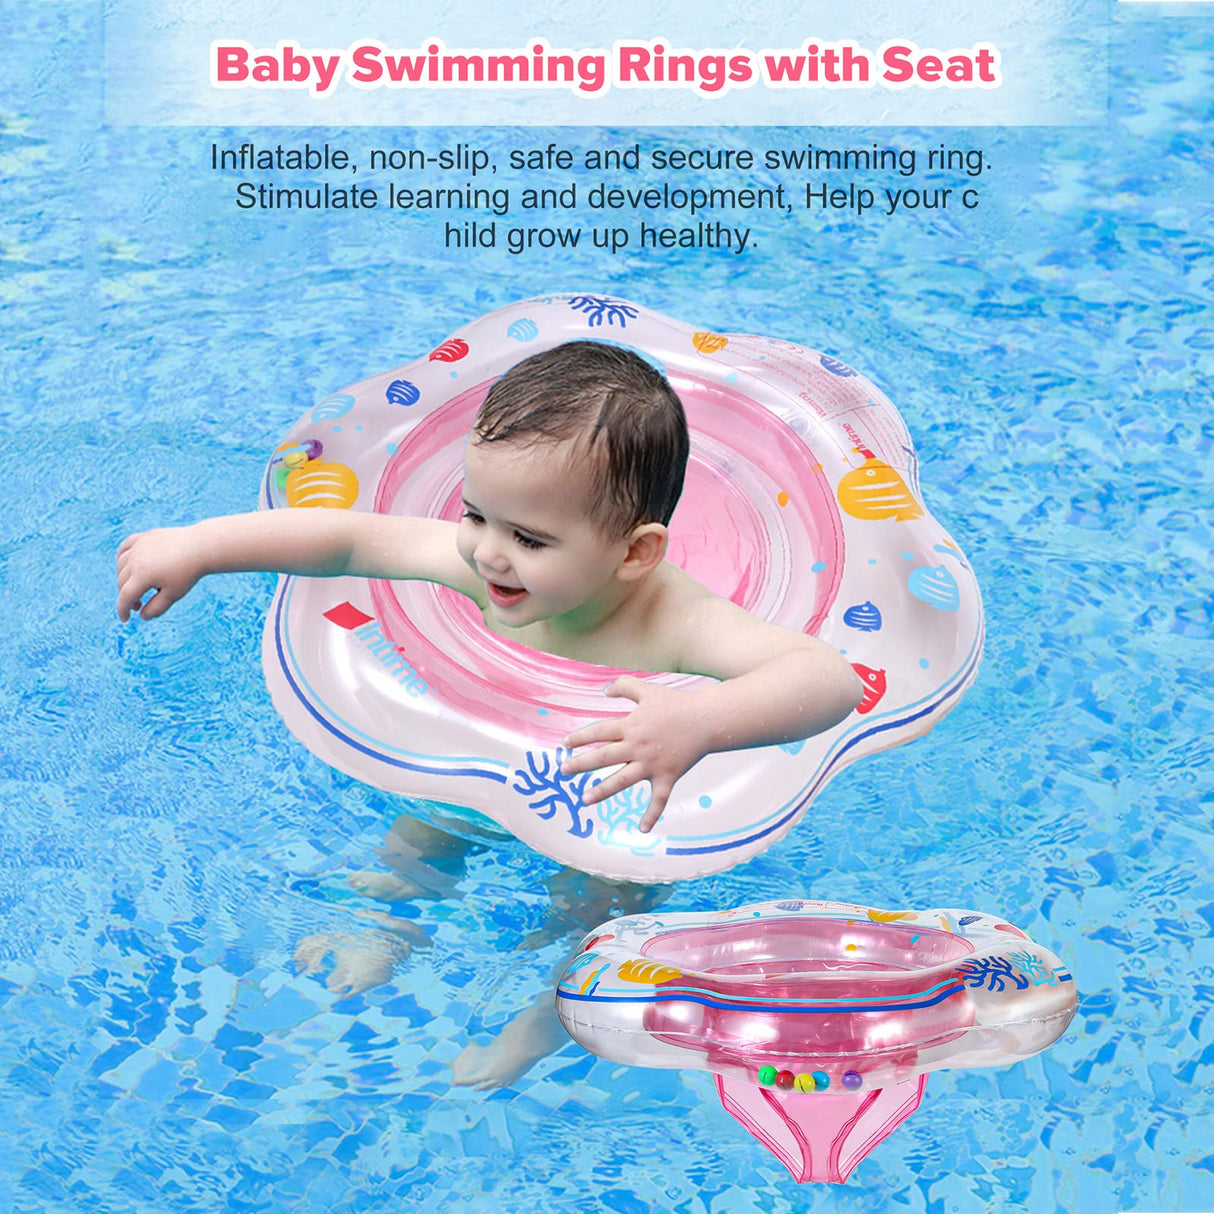 Baby Floats for Pool, Baby Swimming Floats with Safety Seat, Swim Training for Baby of 6-18 Months